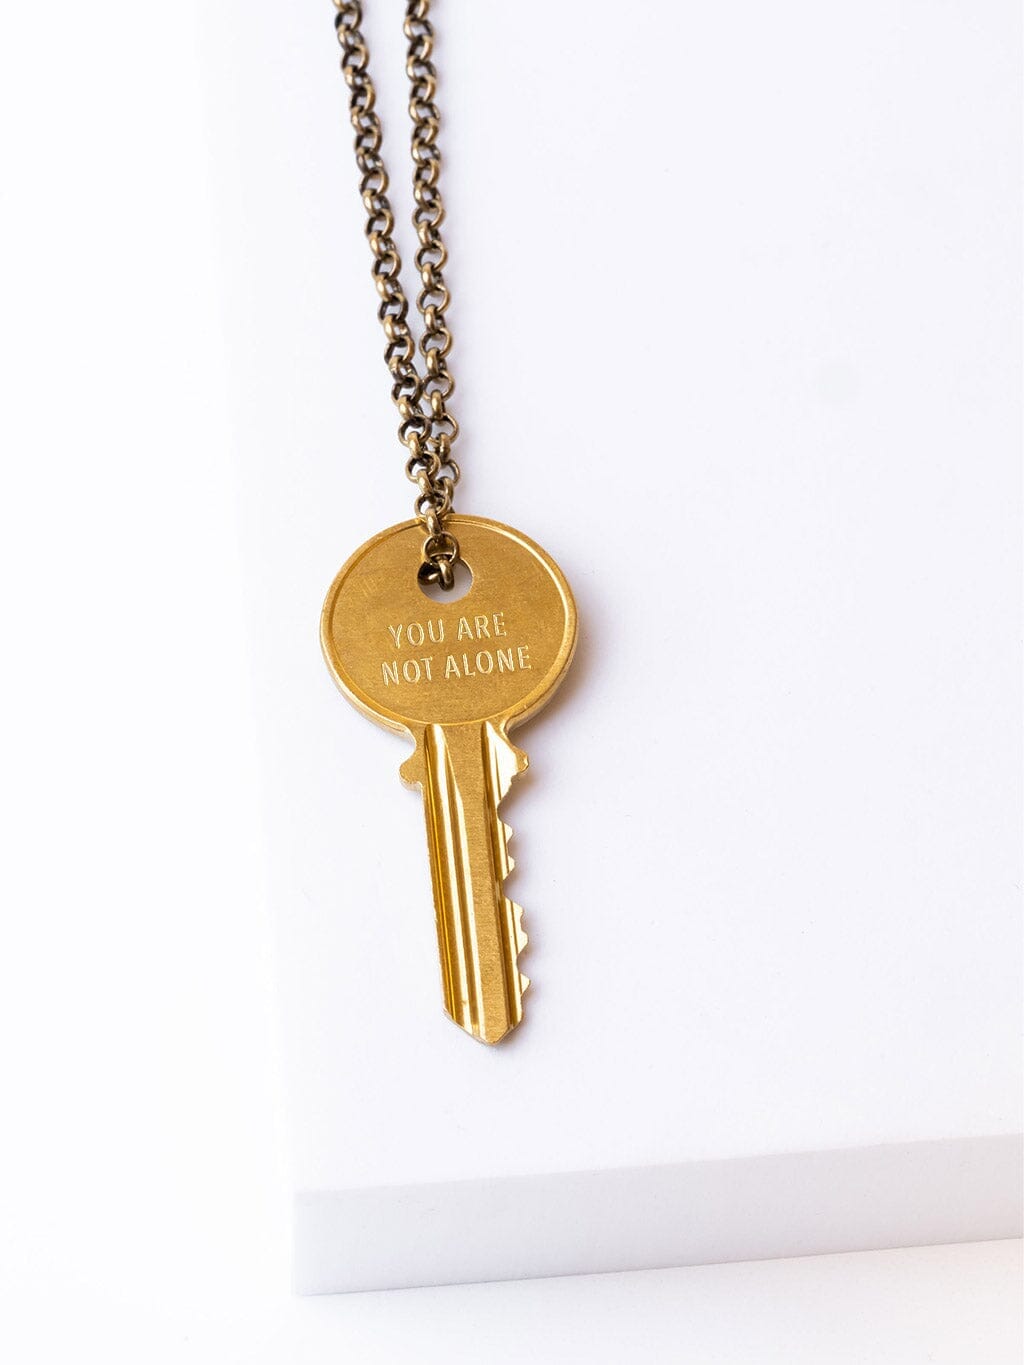 N - YOU ARE NOT ALONE Classic Key Necklace Necklaces The Giving Keys YOU ARE NOT ALONE GOLD 